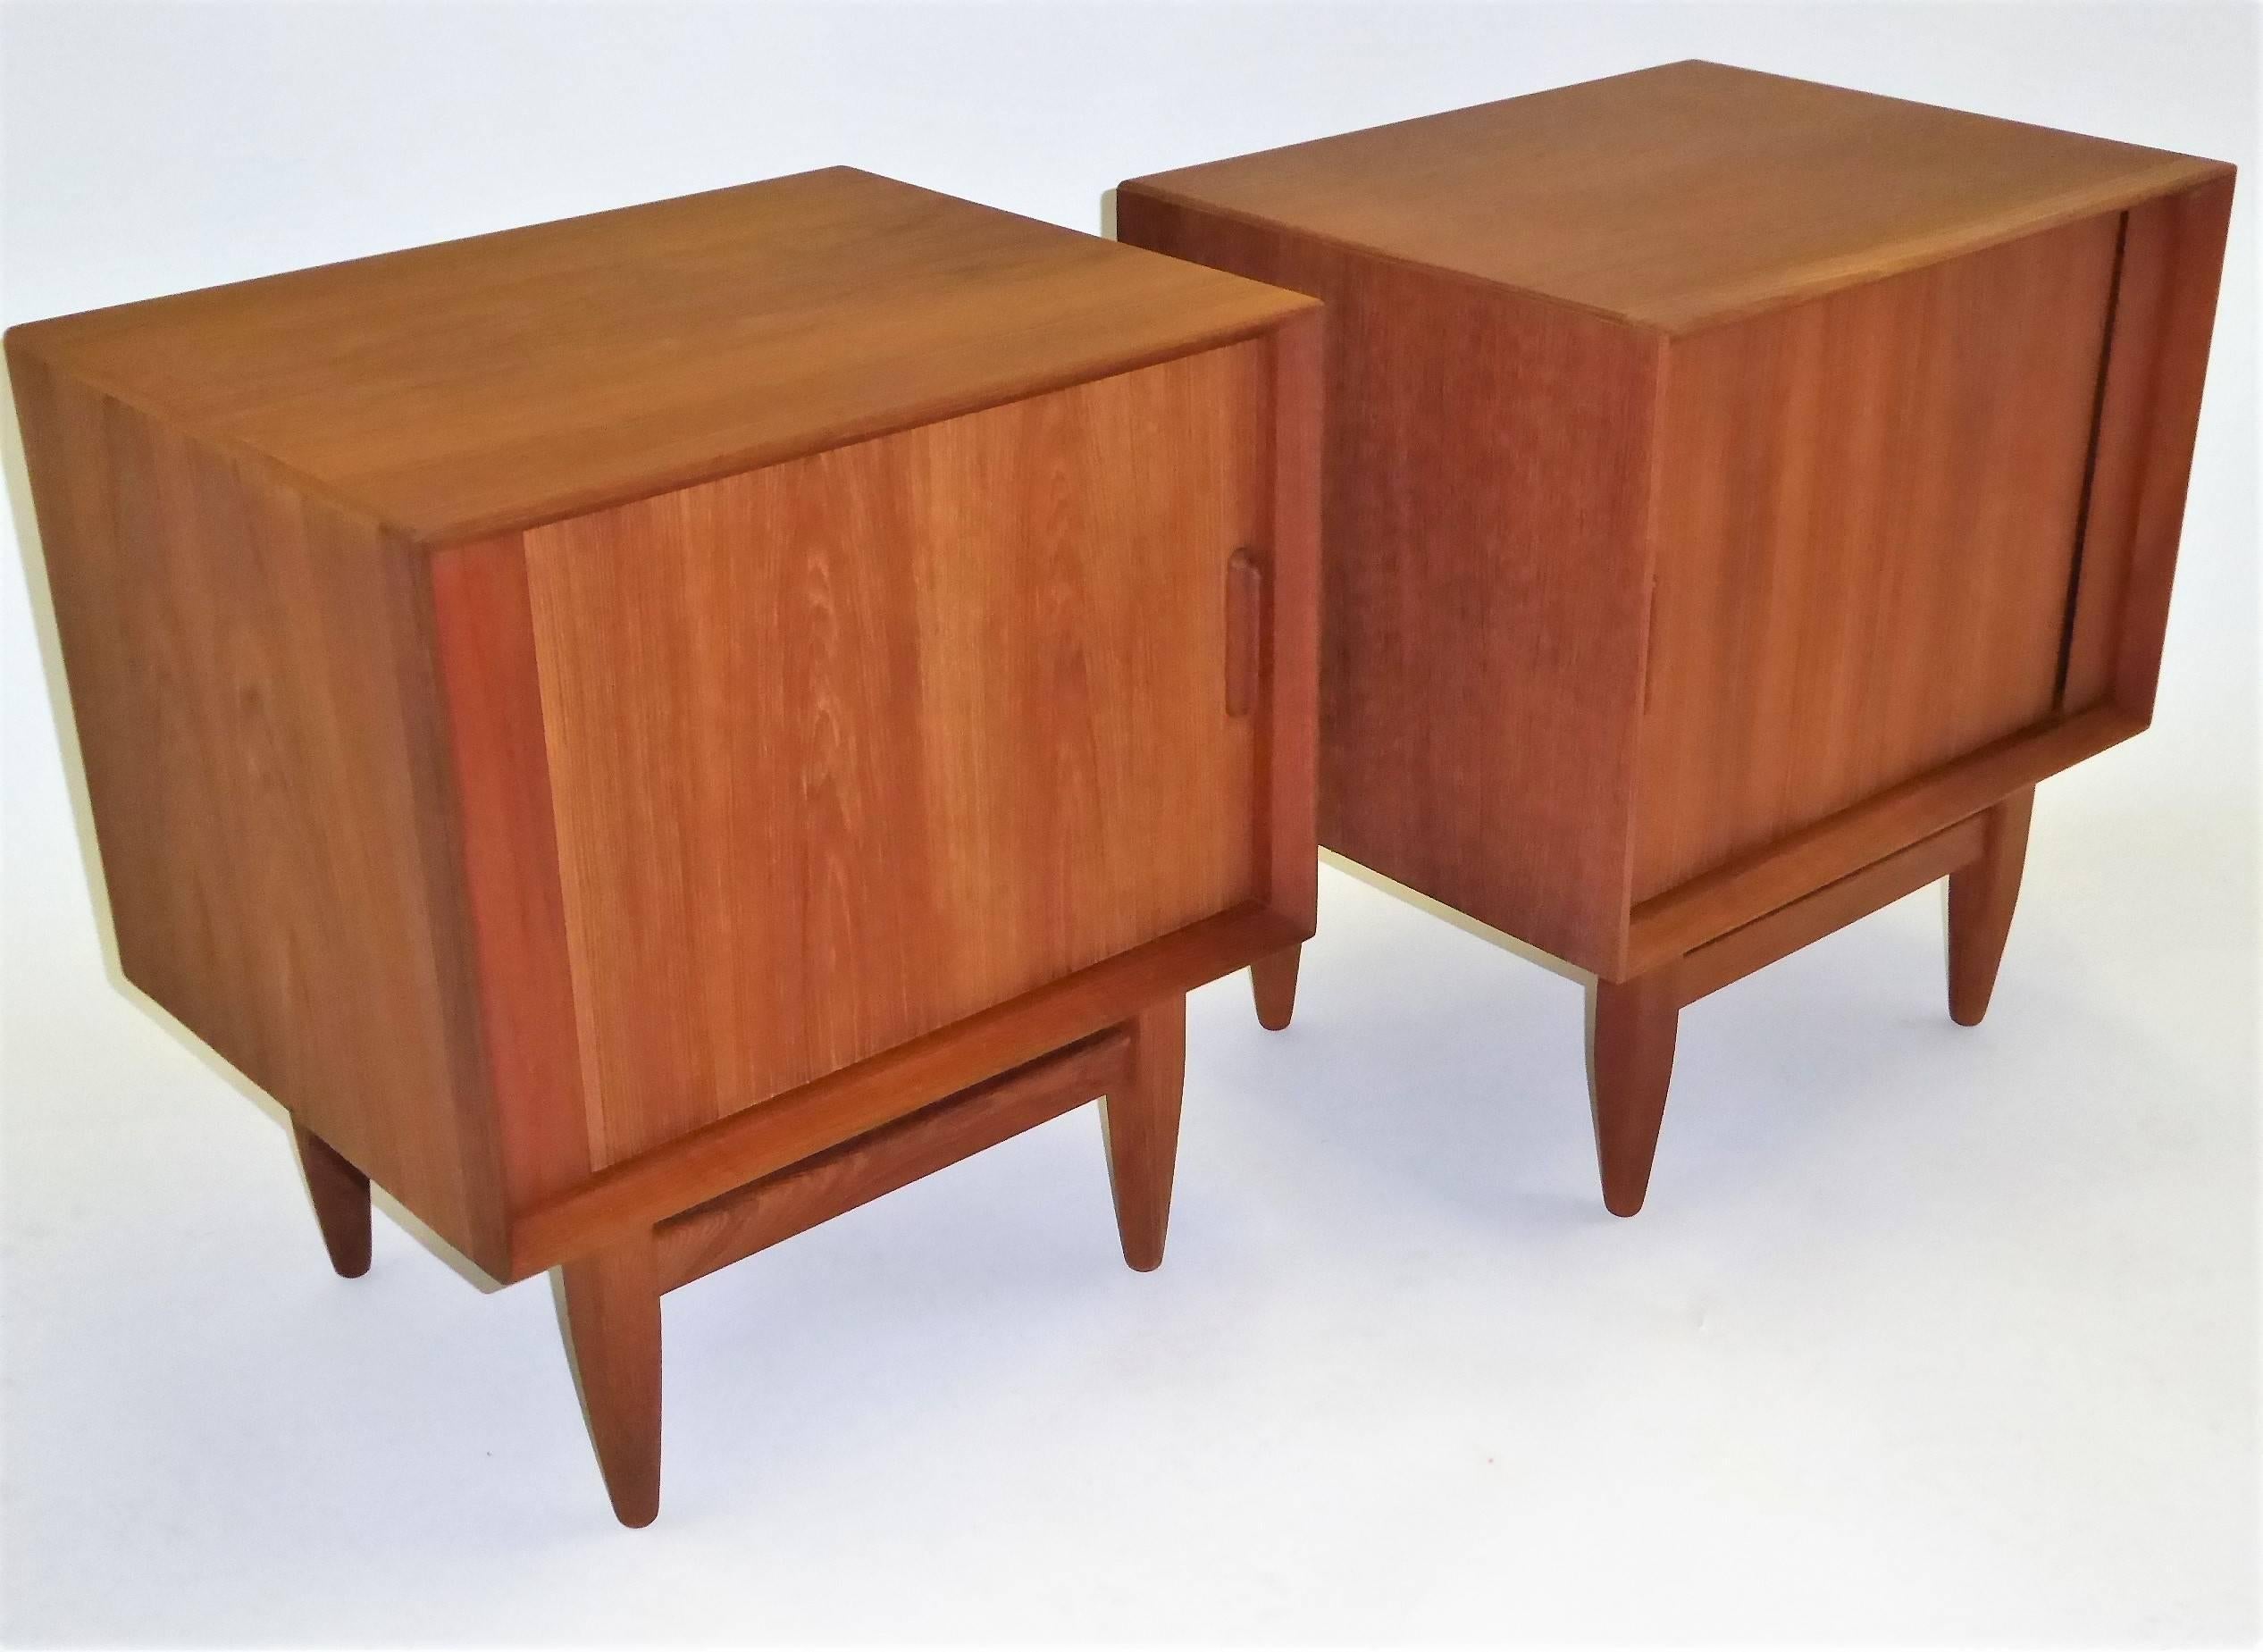 Beautiful pair of Danish nightstands in teak by Arne Wahl Iversen for Falster Møbelfabrik. Tambour doors open to reveal a shelf and drawer. These bedside tables are finished all around. In very good to excellent condition, they date back to the